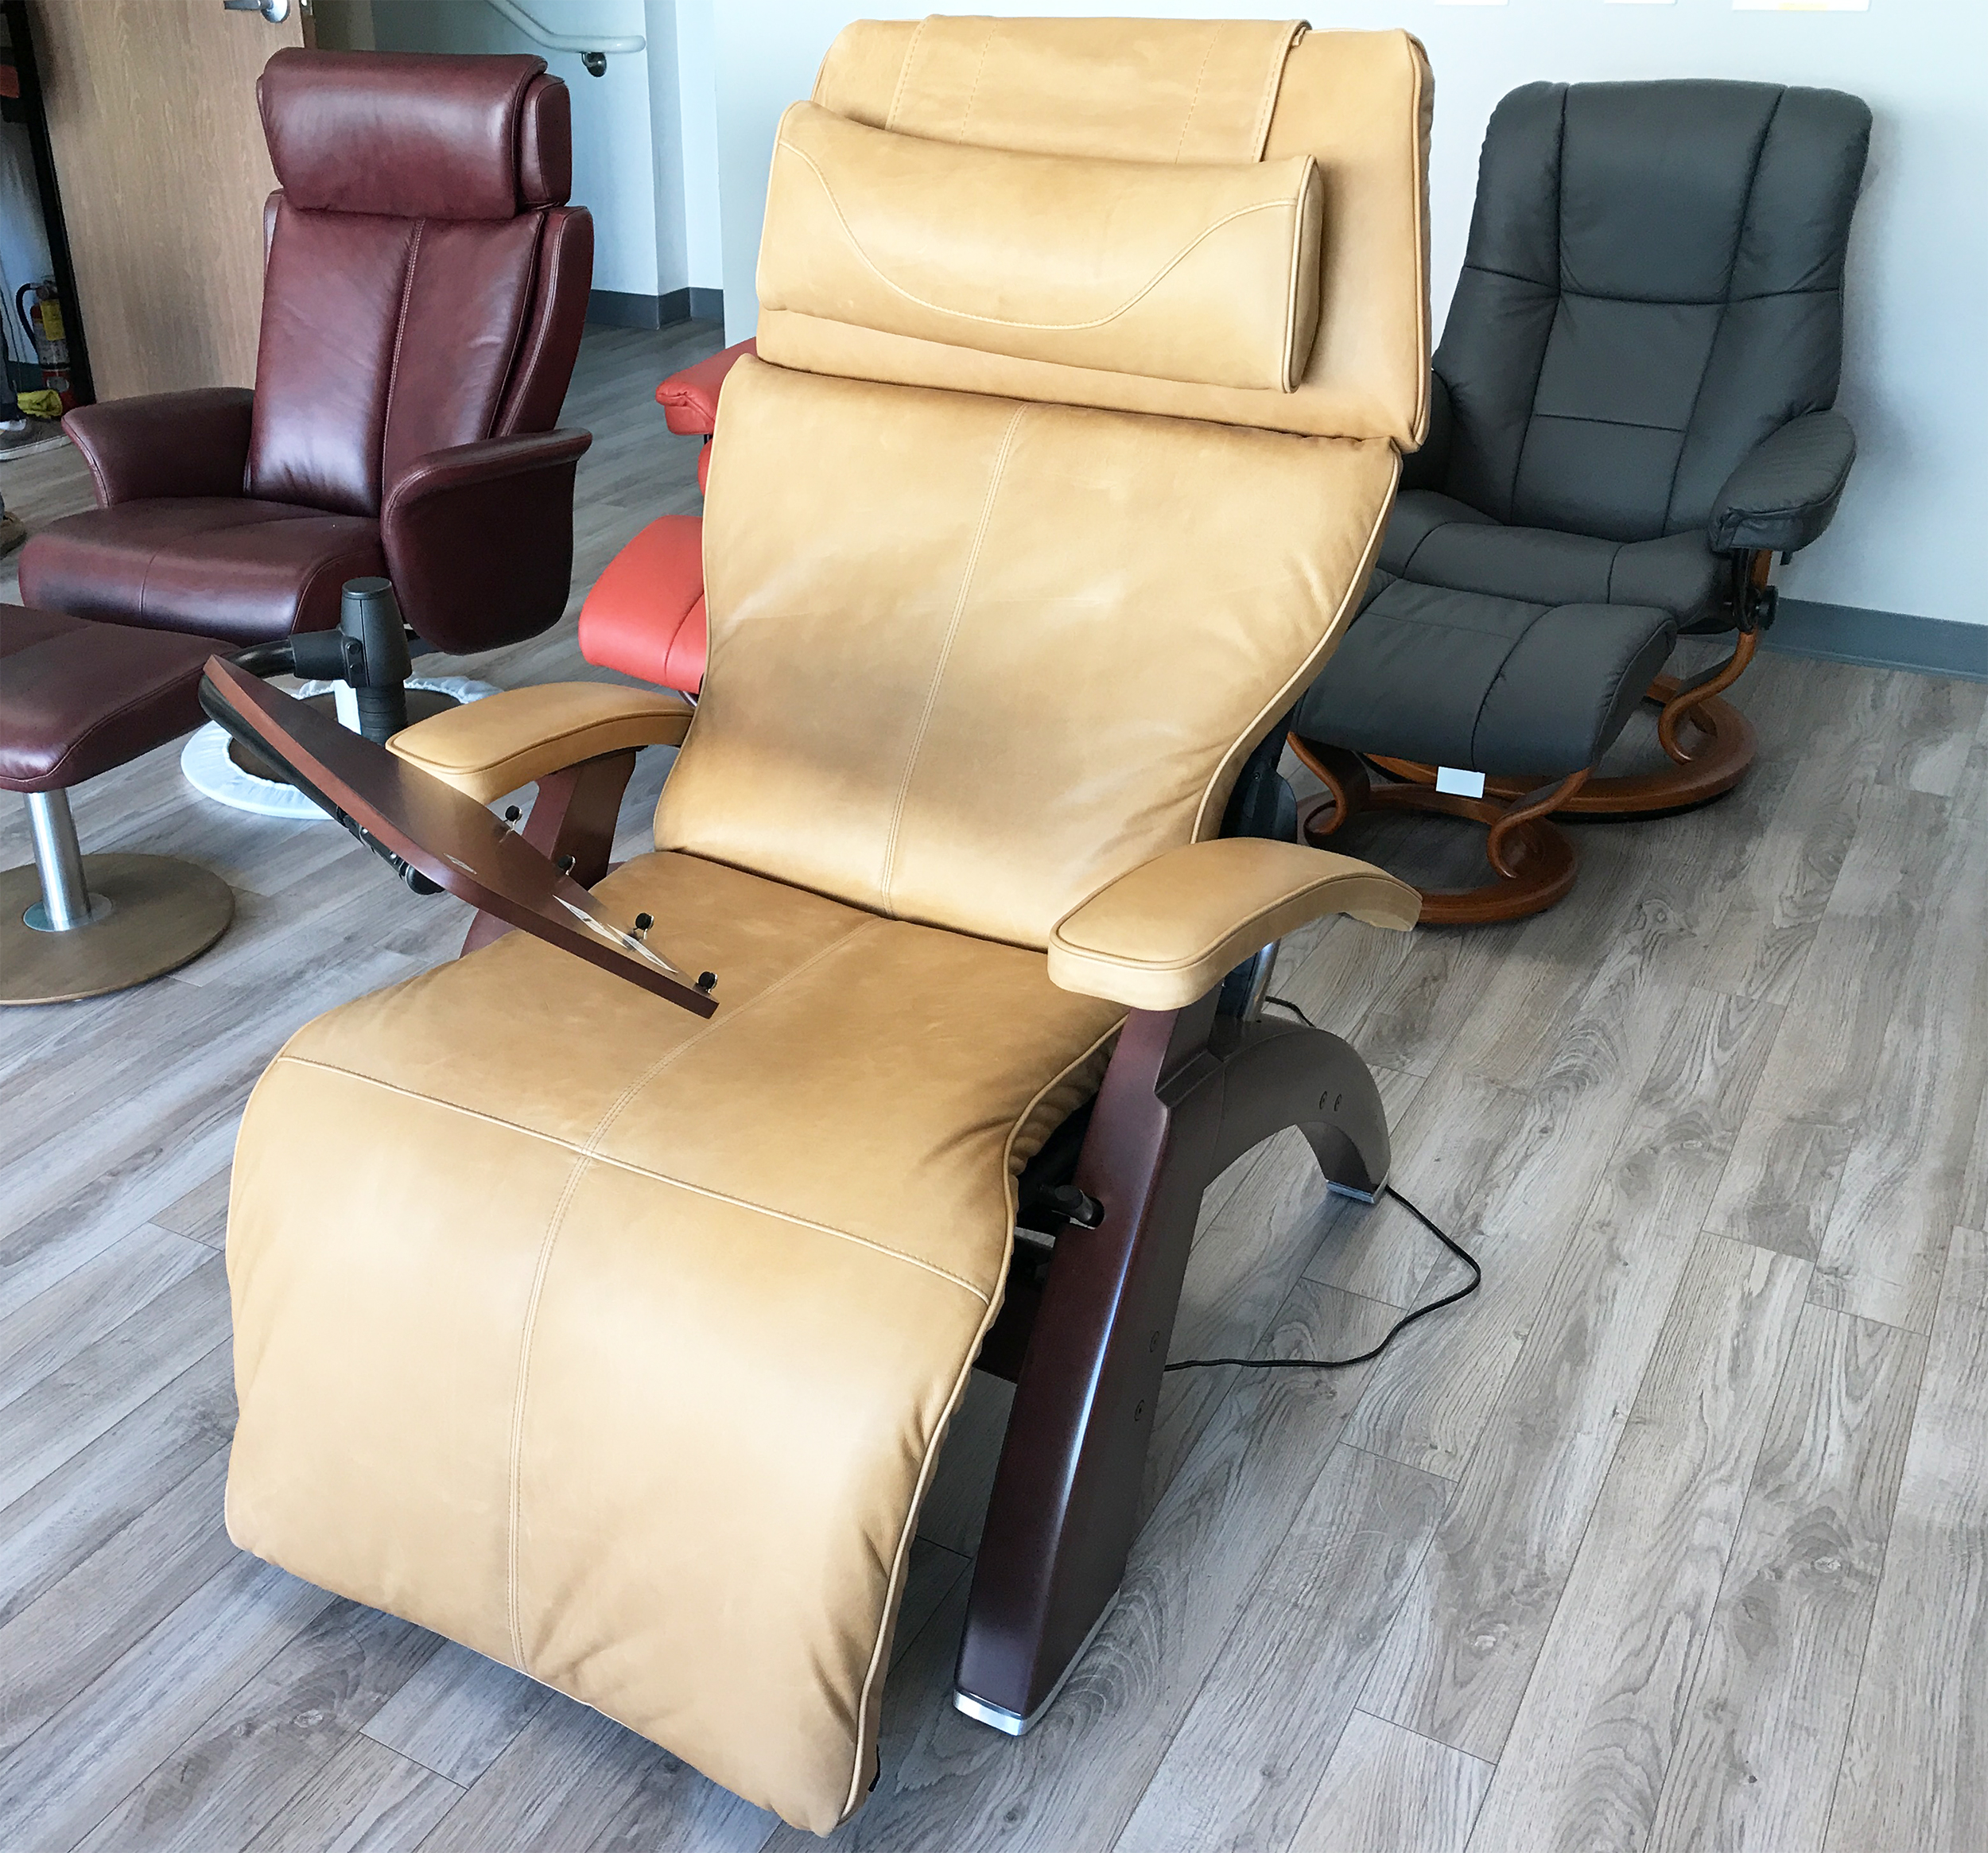 https://vitalityweb.com/backstore/HumanTouch/pics/Human-Touch-PC-610-Omni-Motion-Perfect-Chair-Recliner-Sycamore-Leather-11.jpg